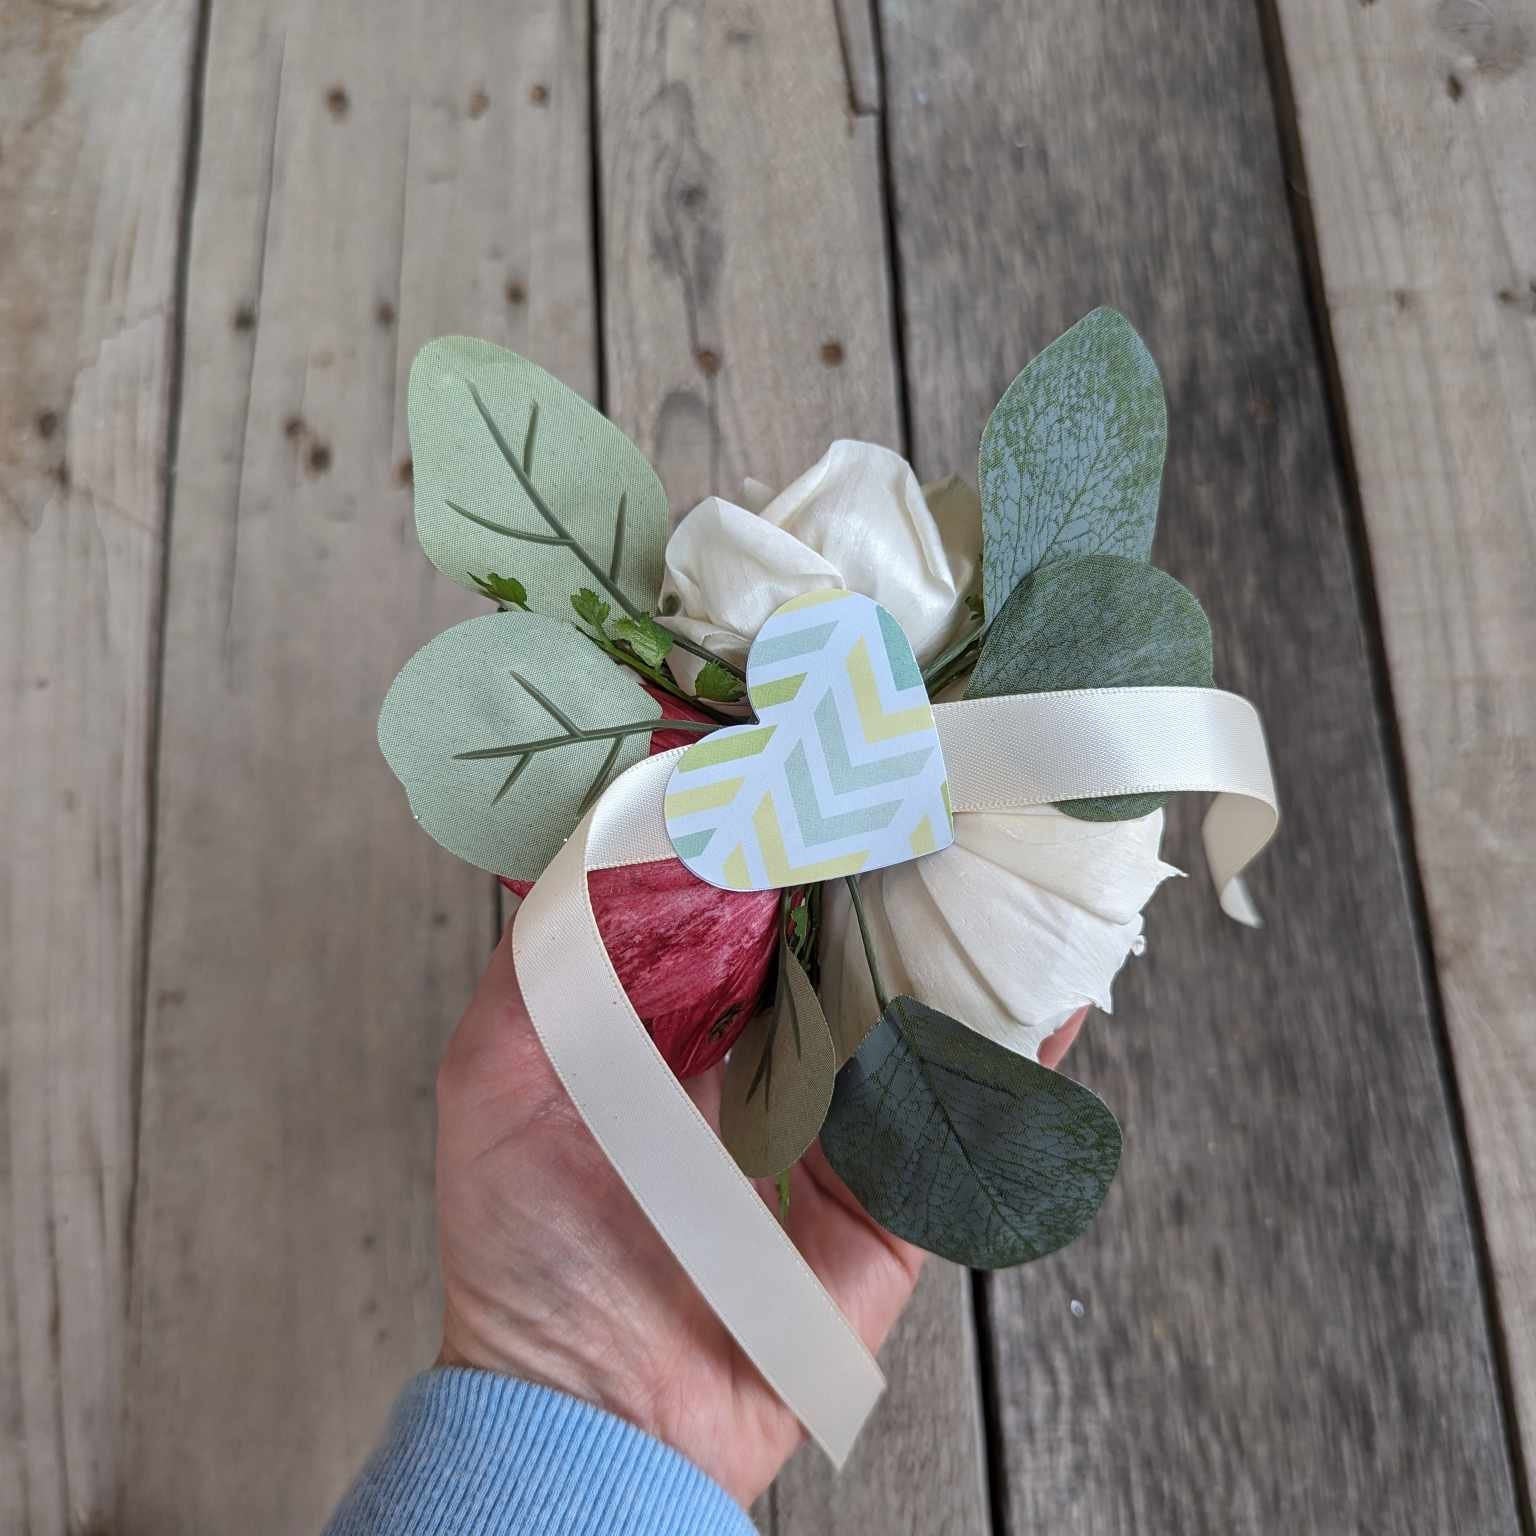 Artificial Corsage and Boutonniere Set, Wood Flower Wrist Corsage for Prom, Wooden Flower Corsage for Wedding, Wedding Boutonniere